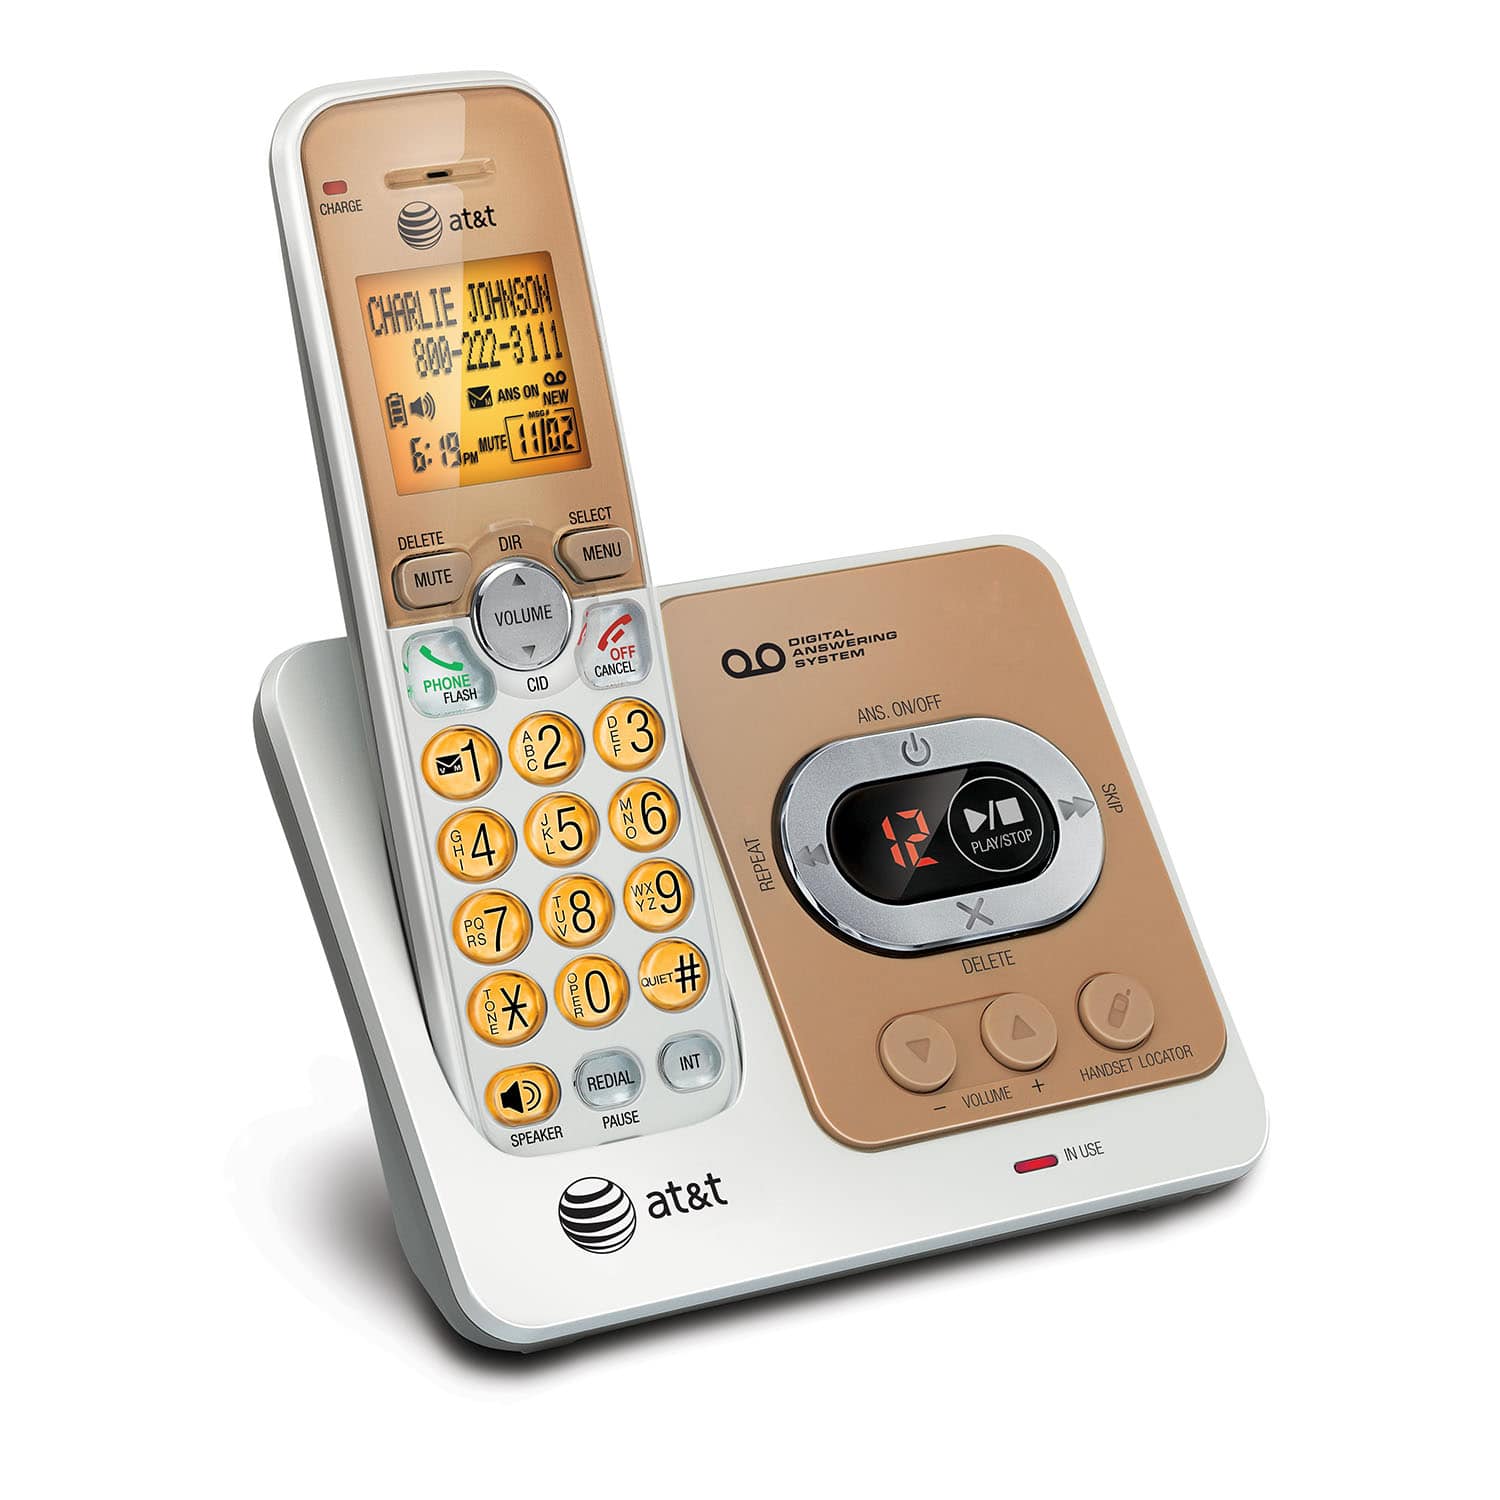 Cordless phone system with caller ID/call waiting - view 3